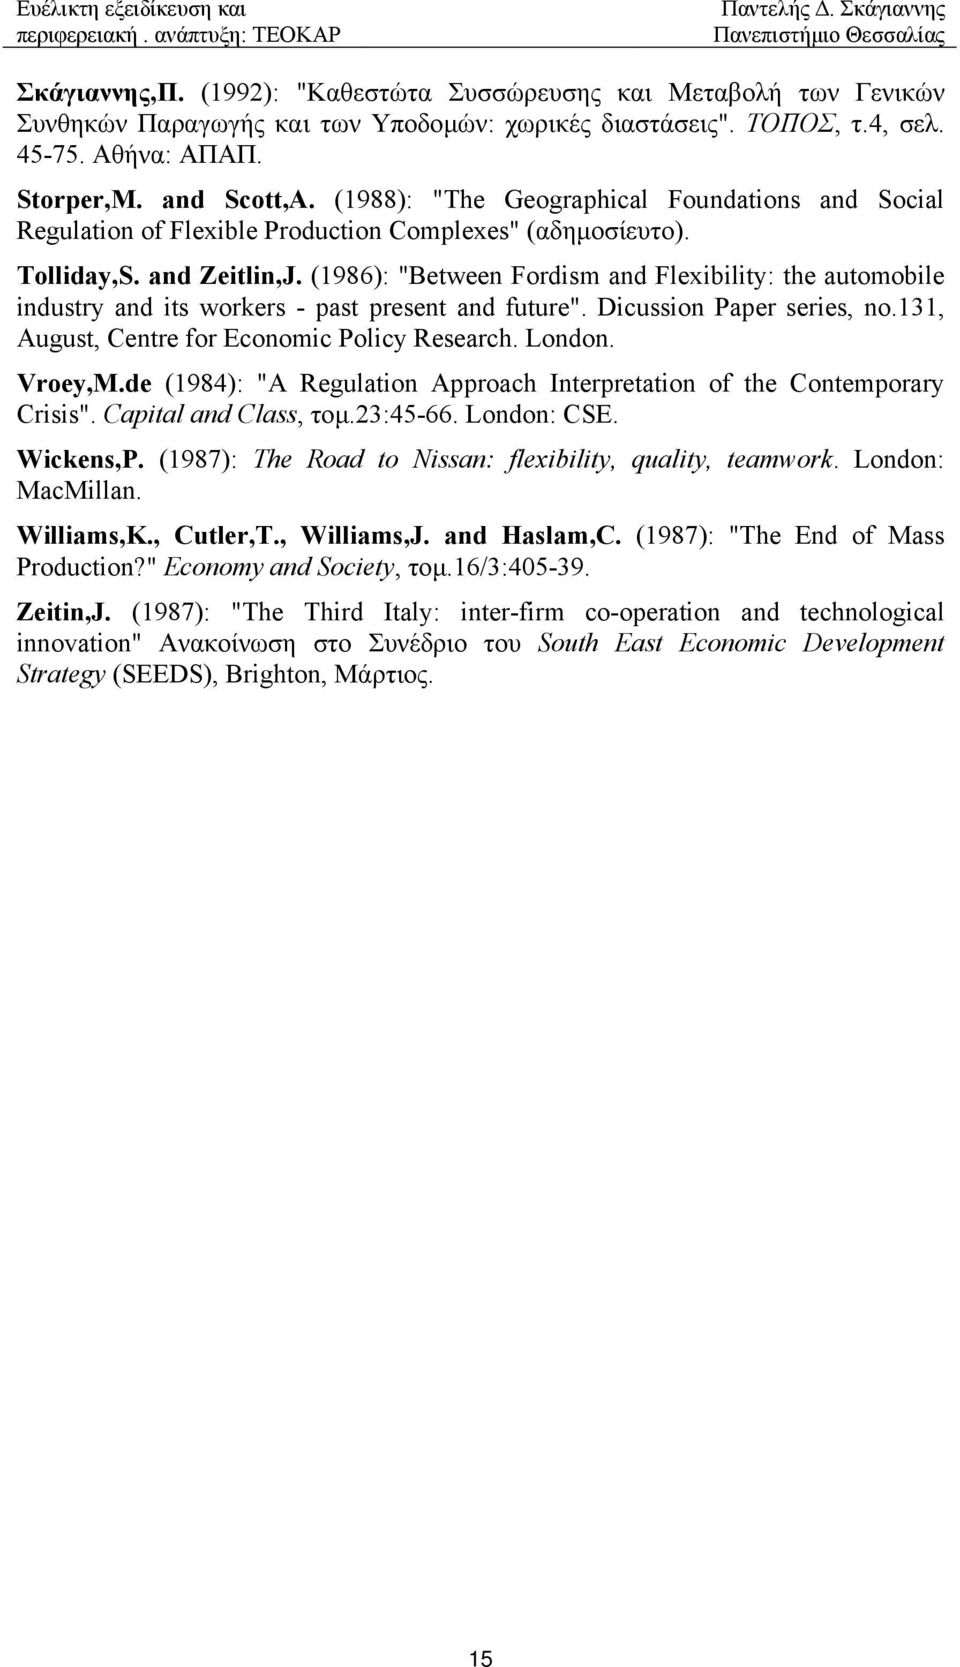 (1986): "Between Fordism and Flexibility: the automobile industry and its workers - past present and future". Dicussion Paper series, no.131, August, Centre for Economic Policy Research. London.